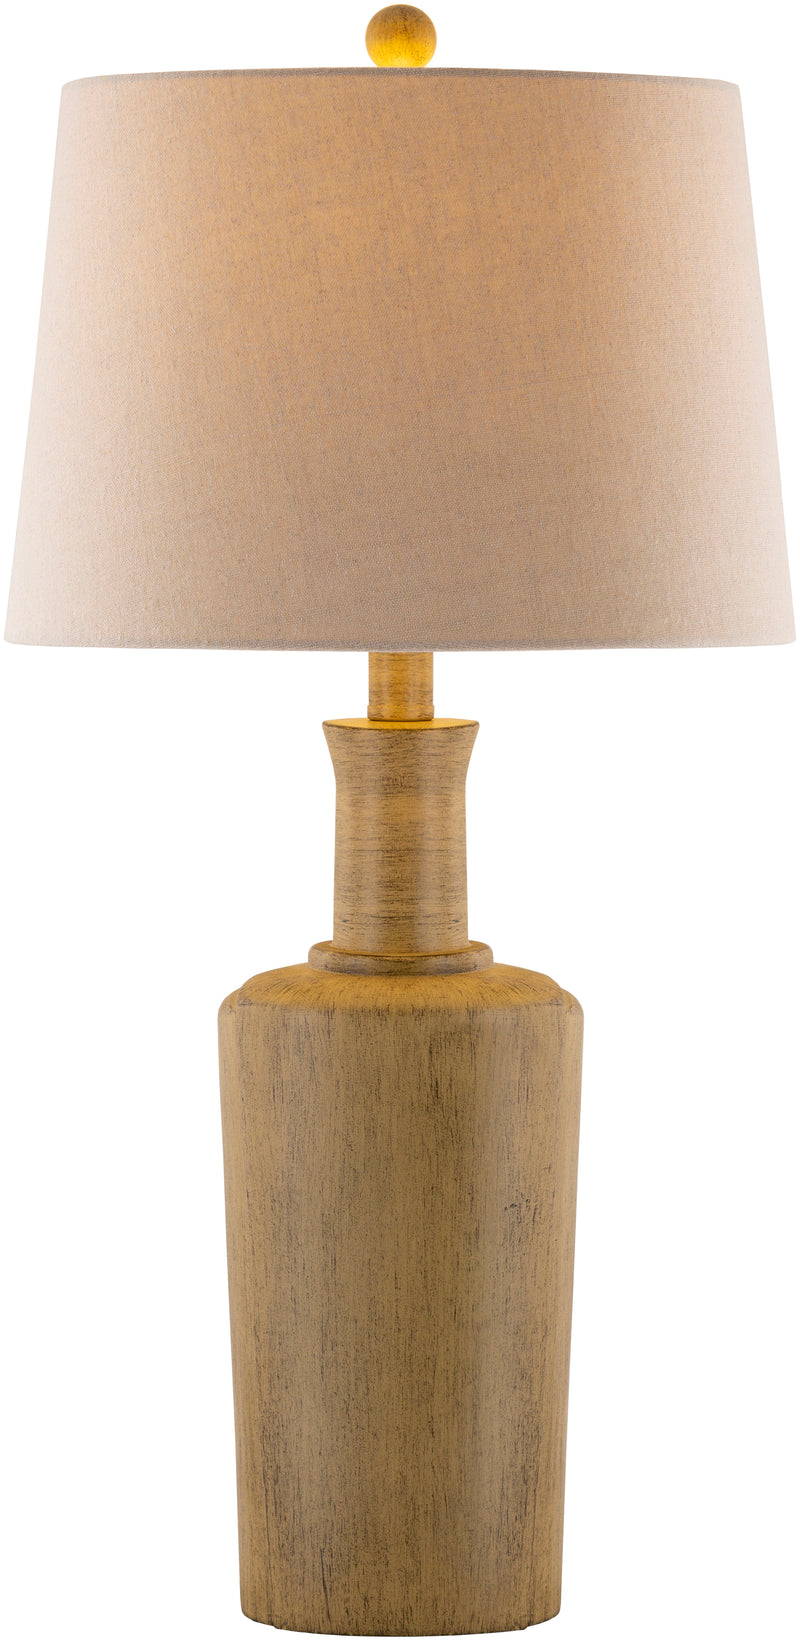 media image for Capitan CPI-001 Table Lamp in Tan & Natural by Surya 213